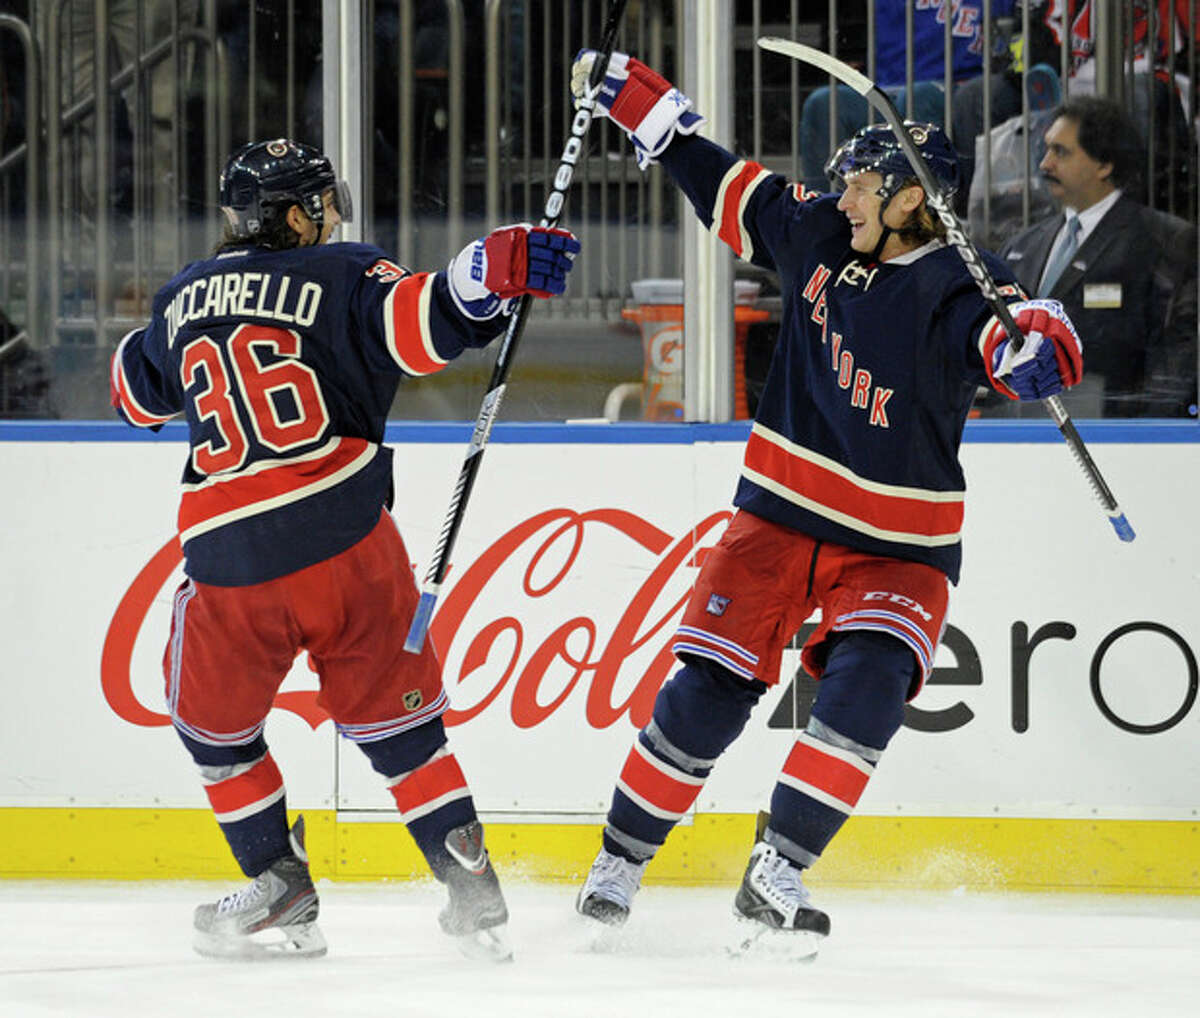 New York Rangers' Carl Hagelin, right, celebrates his goal with Mats Zuccarello during the second period of an NHL hockey game against the Carolina Hurricanes on Saturday, Nov. 2, 2013, at Madison Square Garden in New York. (AP Photo/Bill Kostroun)